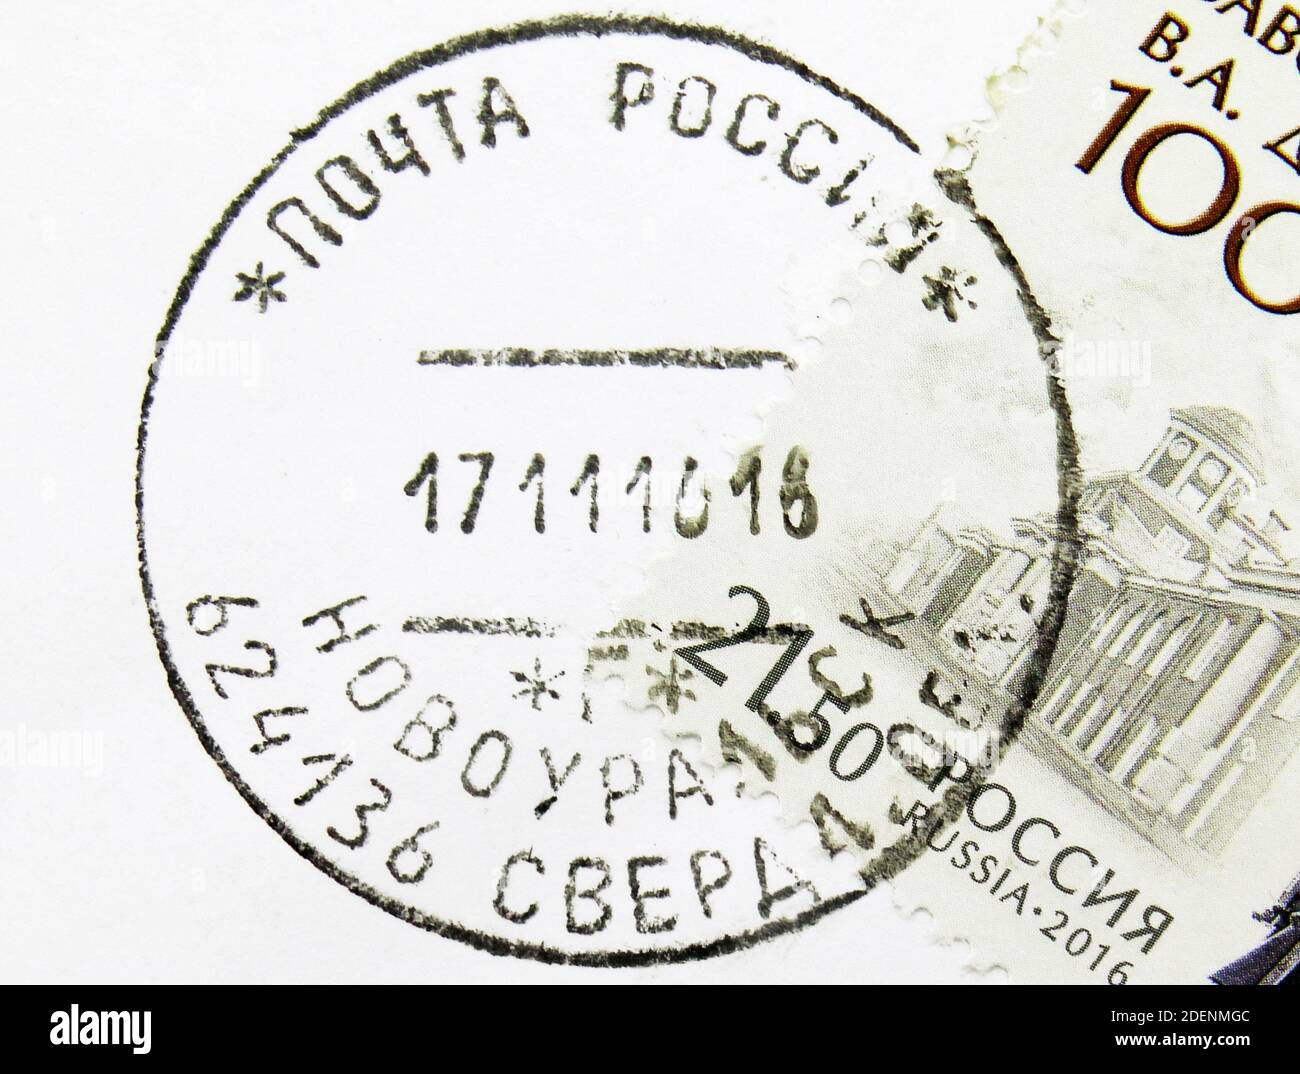 MOSCOW, RUSSIA - MAY 17, 2020: Postage stamp printed in Russia with stamp of Novouralsk city, Sverdlovsk Oblast, dated 2016 Stock Photo